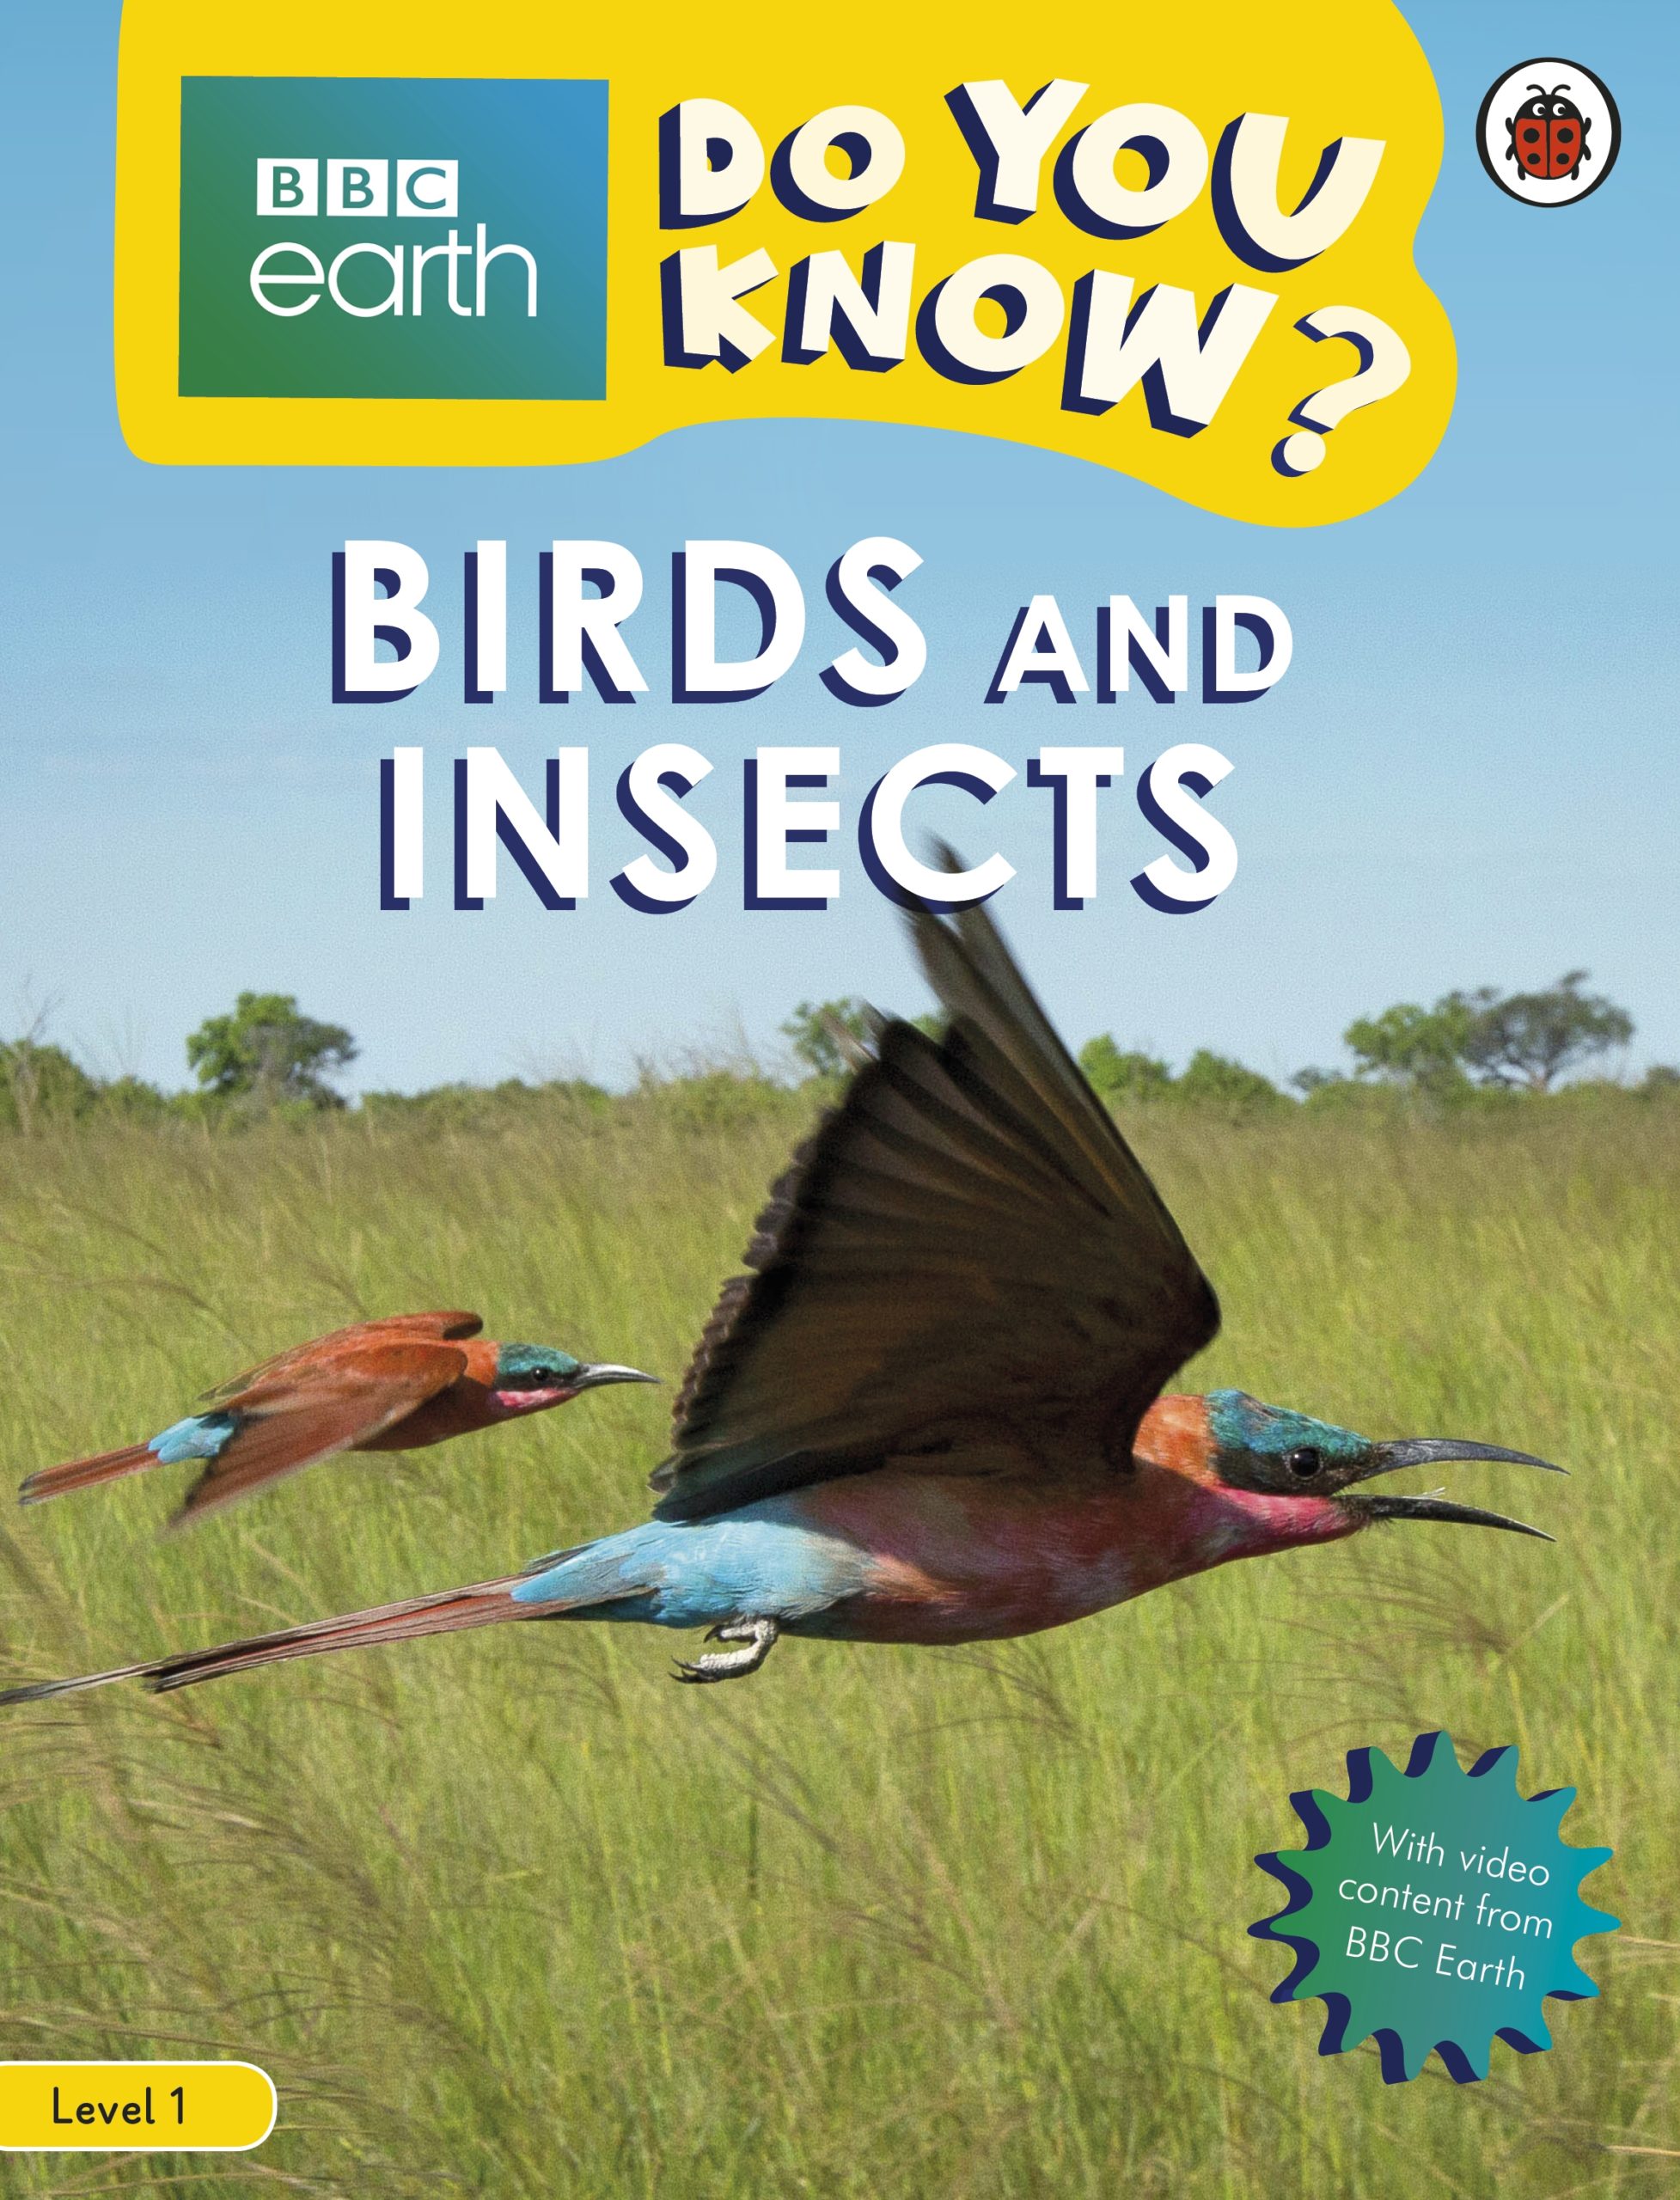 Do You Know? – BBC Earth Birds and Insects - Ladybird Education